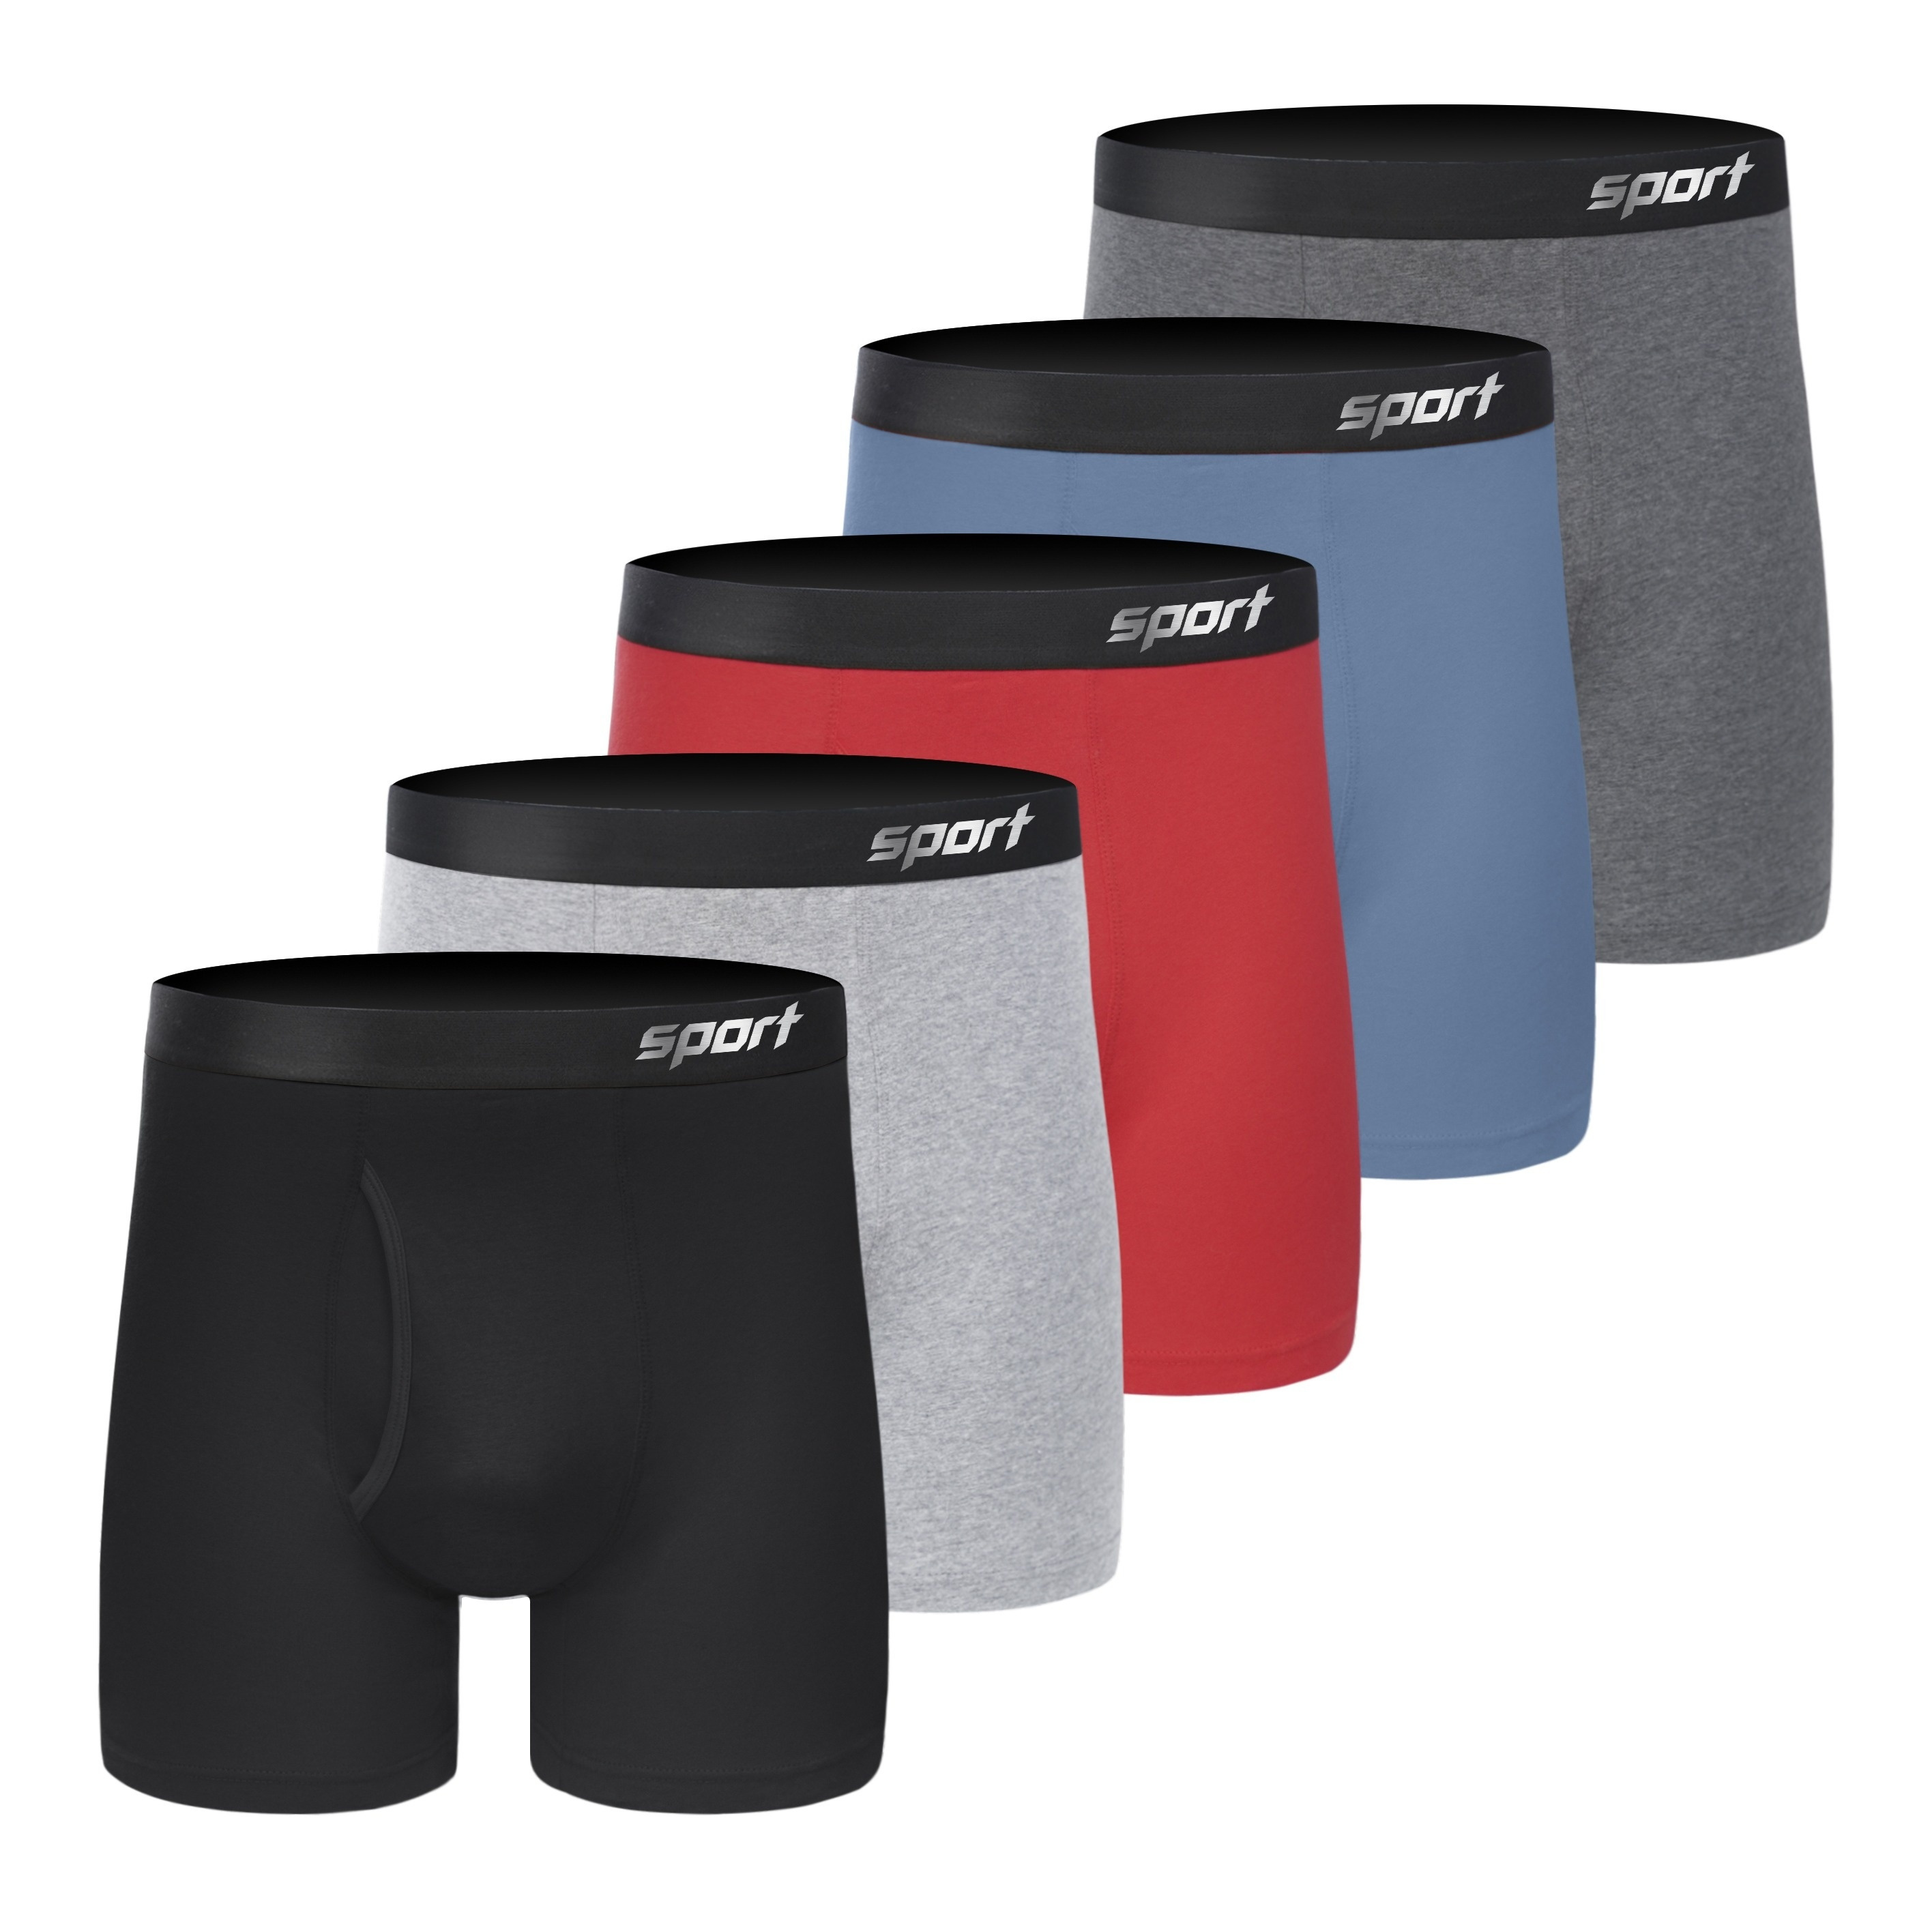 

5pcs Sports Print Men's Cotton Long Style Boxer Briefs With Half Open Fly, Comfortable Underwear High Elastic Waistband Sports Trunks Soft & Breathable Underpants For Daily Wear & Sleep